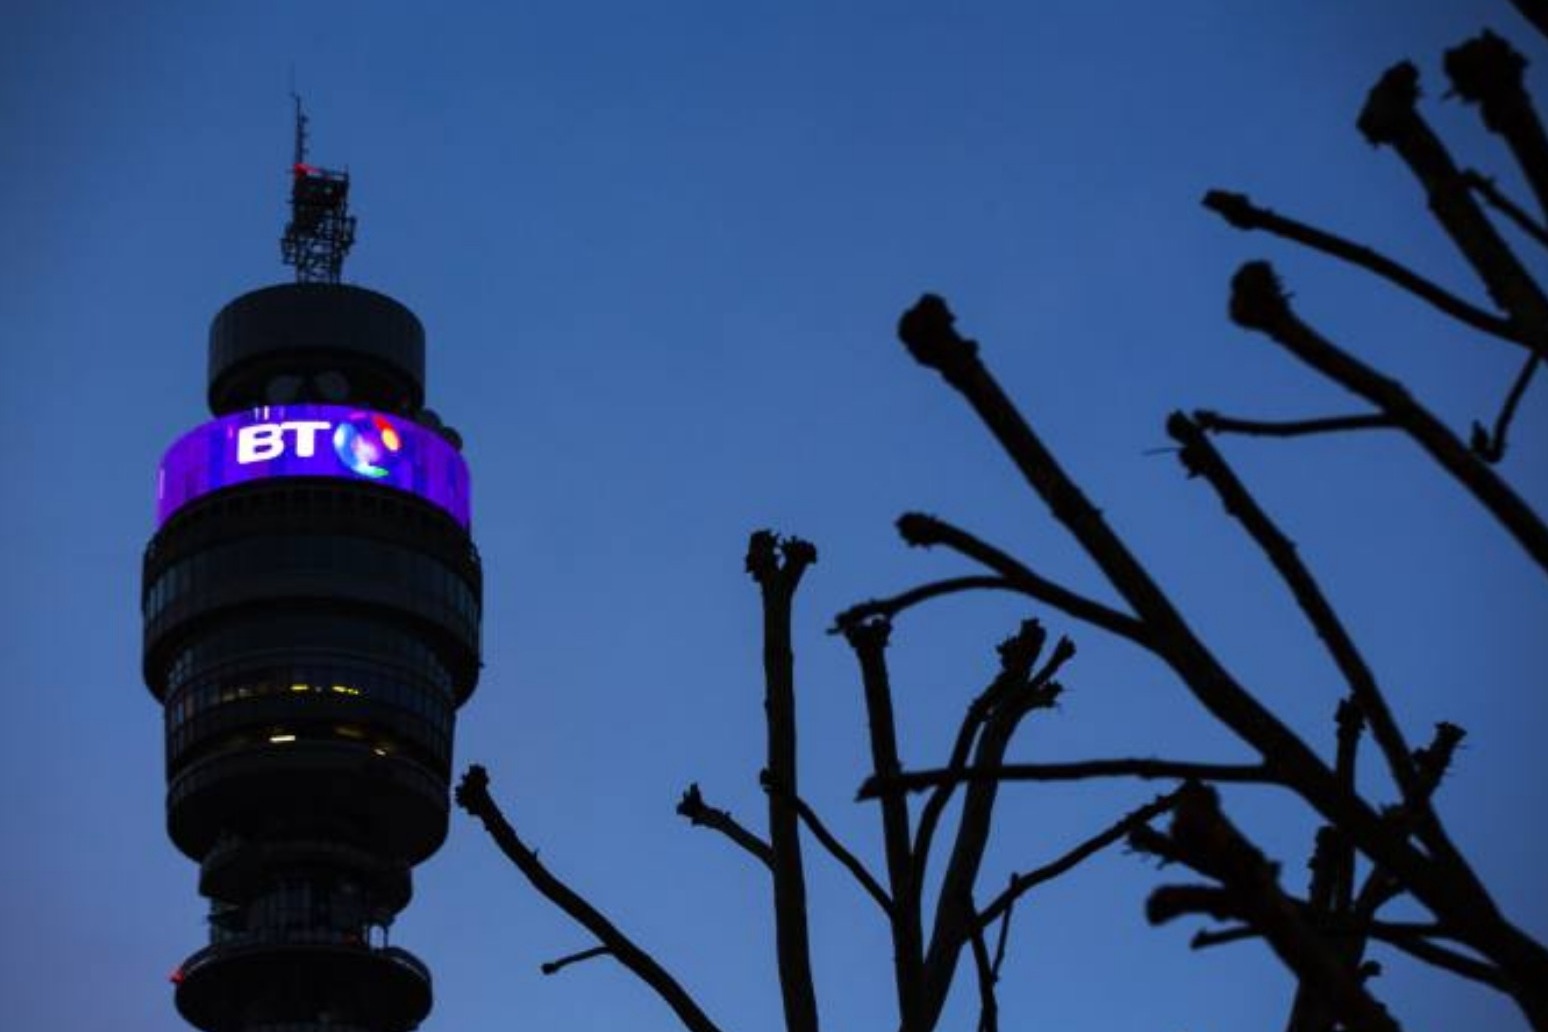 BT to cut 13,000 jobs in biggest cull in a decade 